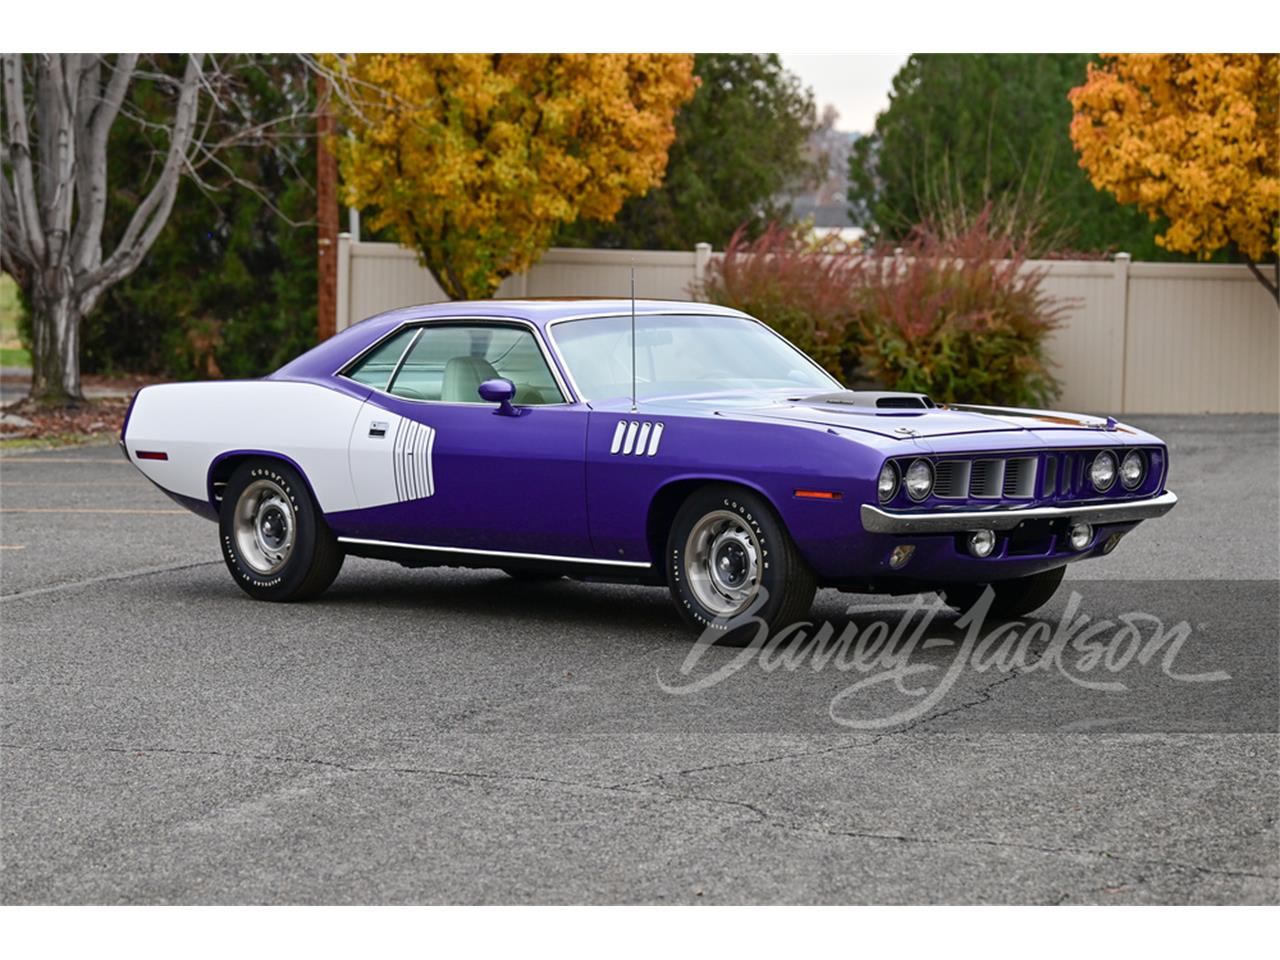 For Sale at Auction: 1971 Plymouth Barracuda in Scottsdale, Arizona for sale in Scottsdale, AZ